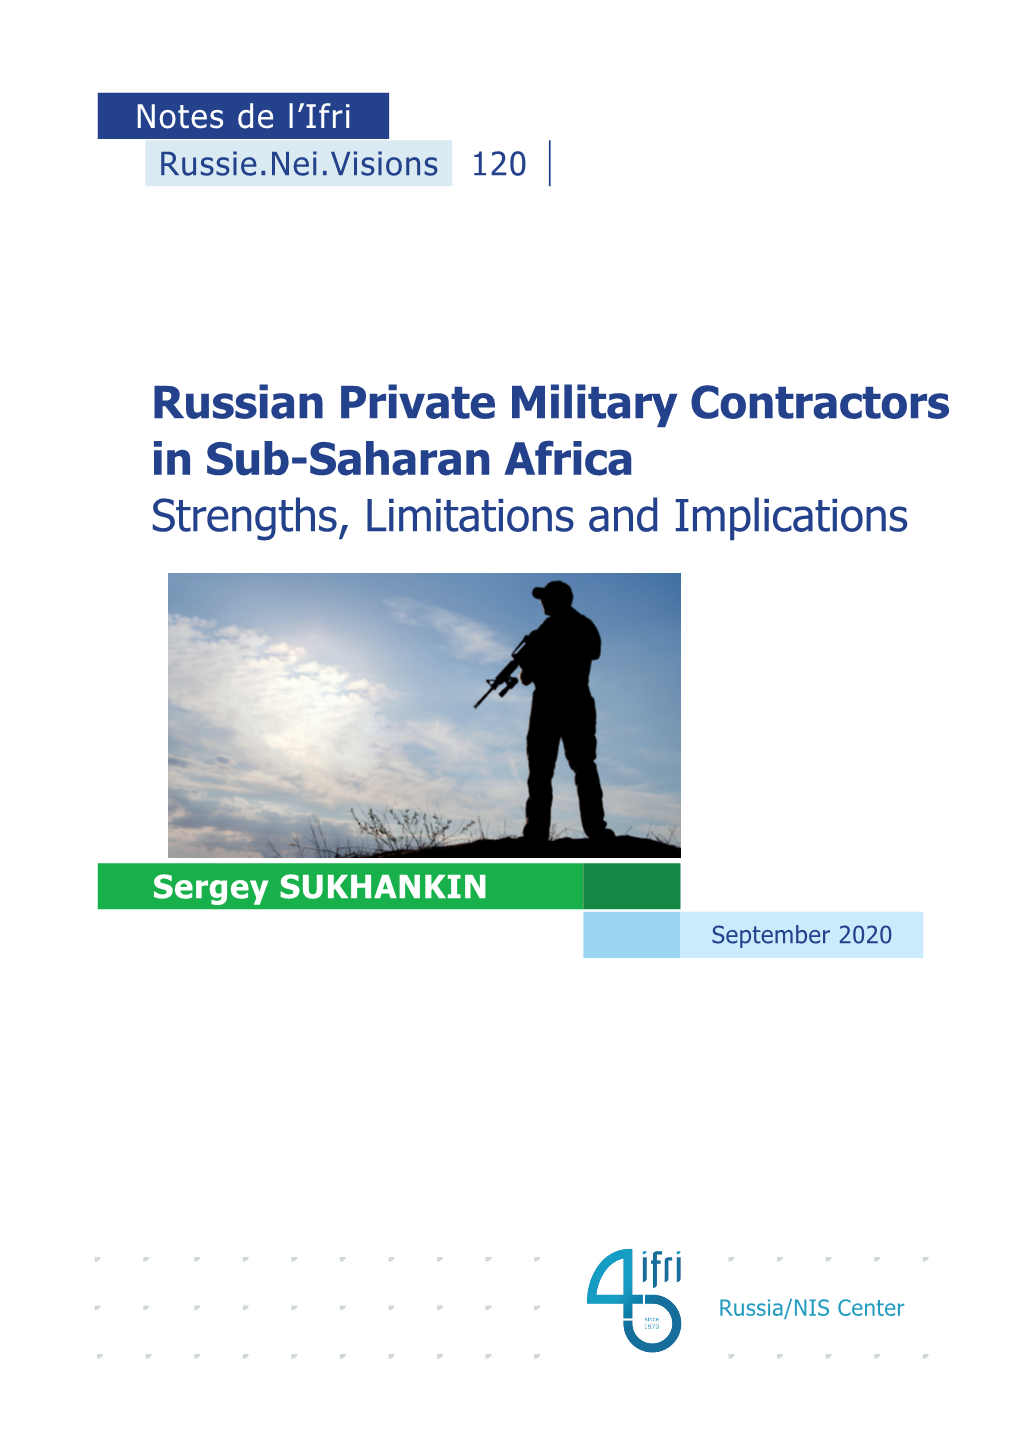 Russian Private Military Contractors in Sub-Saharan Africa Strengths, Limitations and Implications